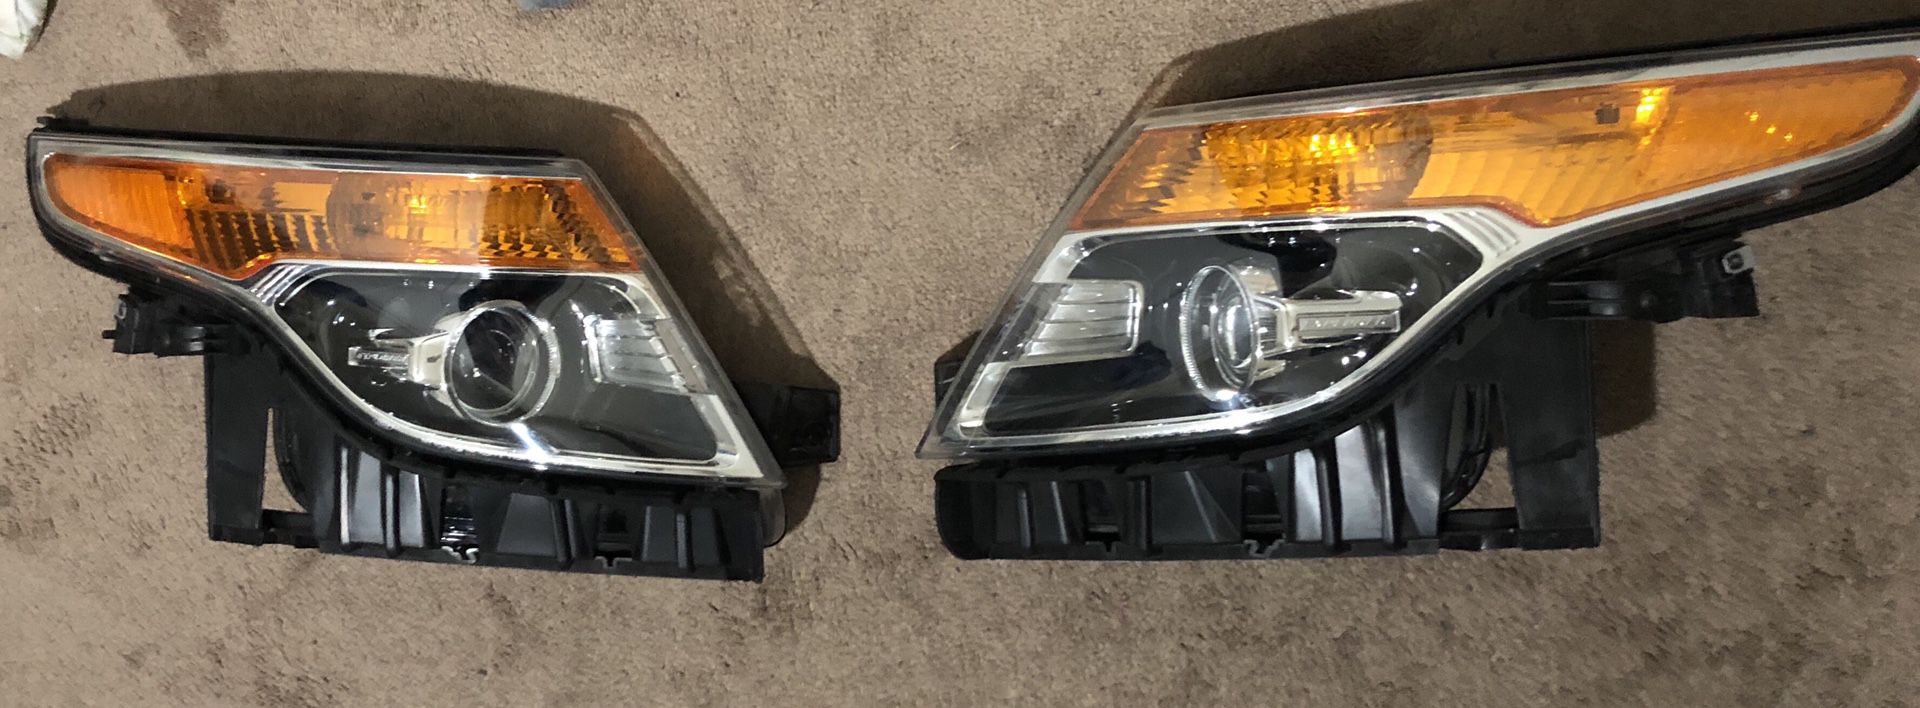 2011 - 2015 FORD EXPLORER FACTORY / OEM HALOGEN HEADLIGHTS LIKE NEW CONDITION